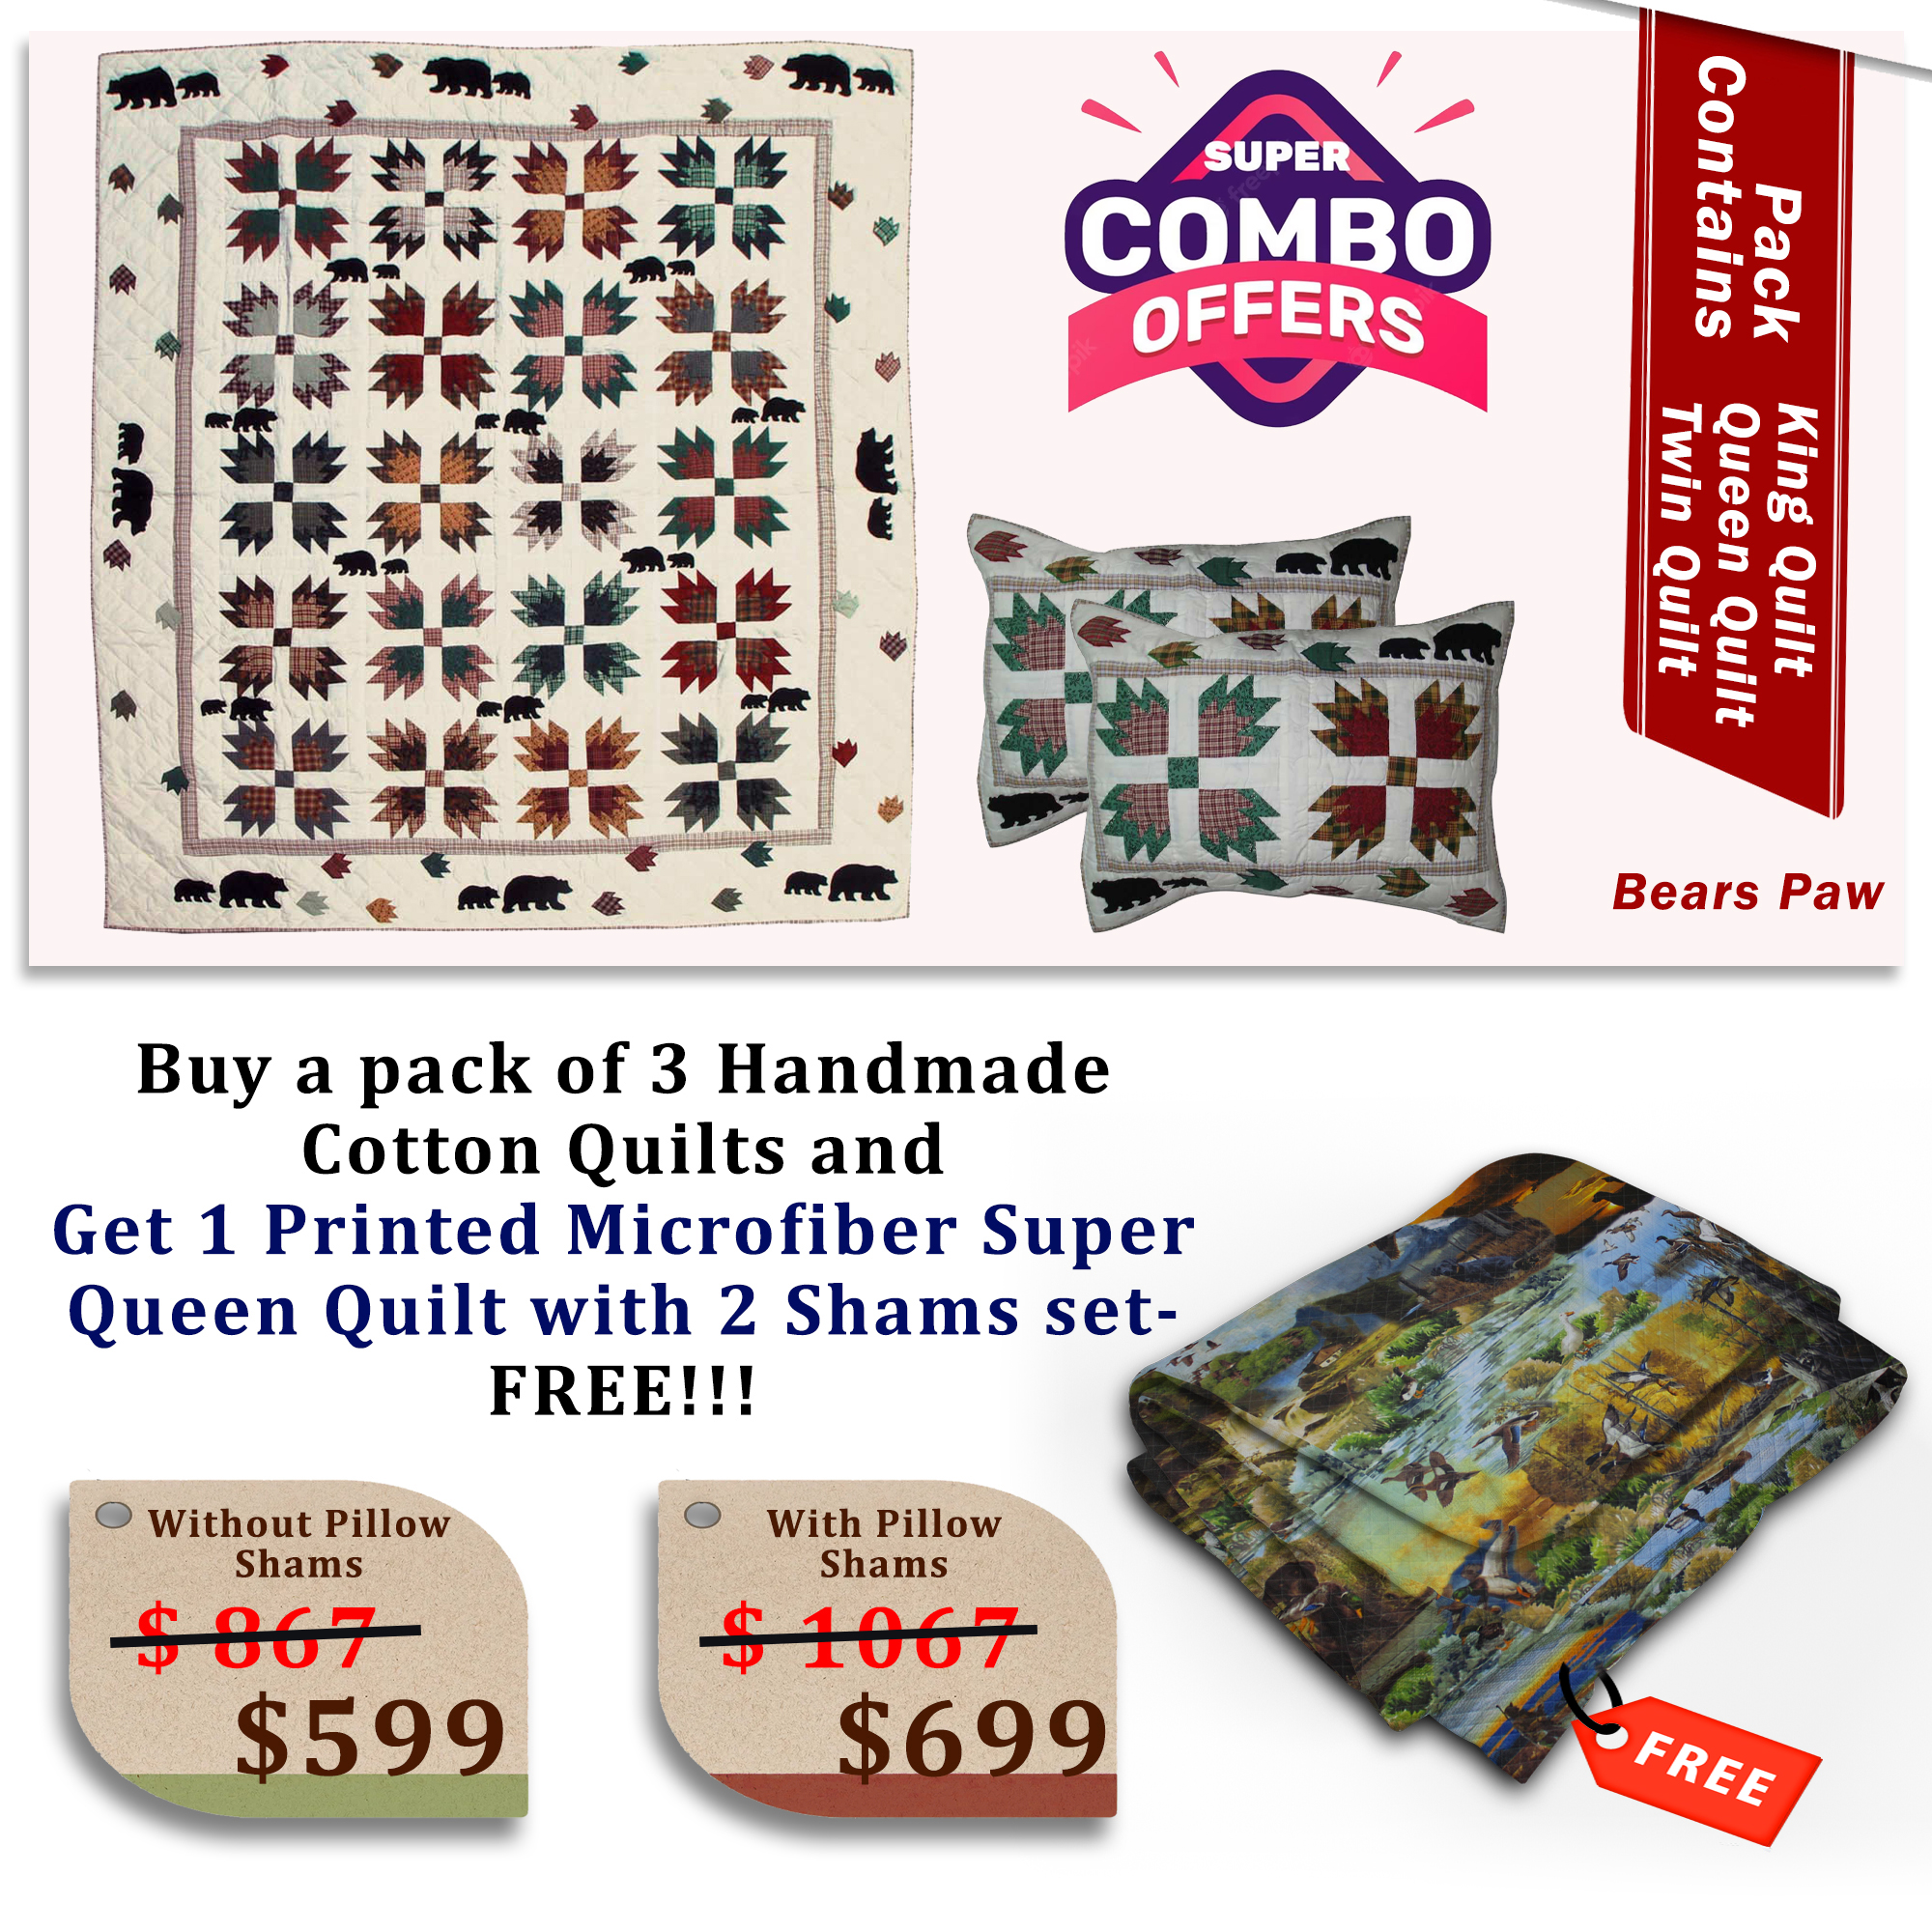 Bears Paw - Handmade Cotton quilts | Matching pillow shams | Buy 3 cotton quilts and get 1 Printed Microfiber Super Queen Quilt with 2 Shams set FREE